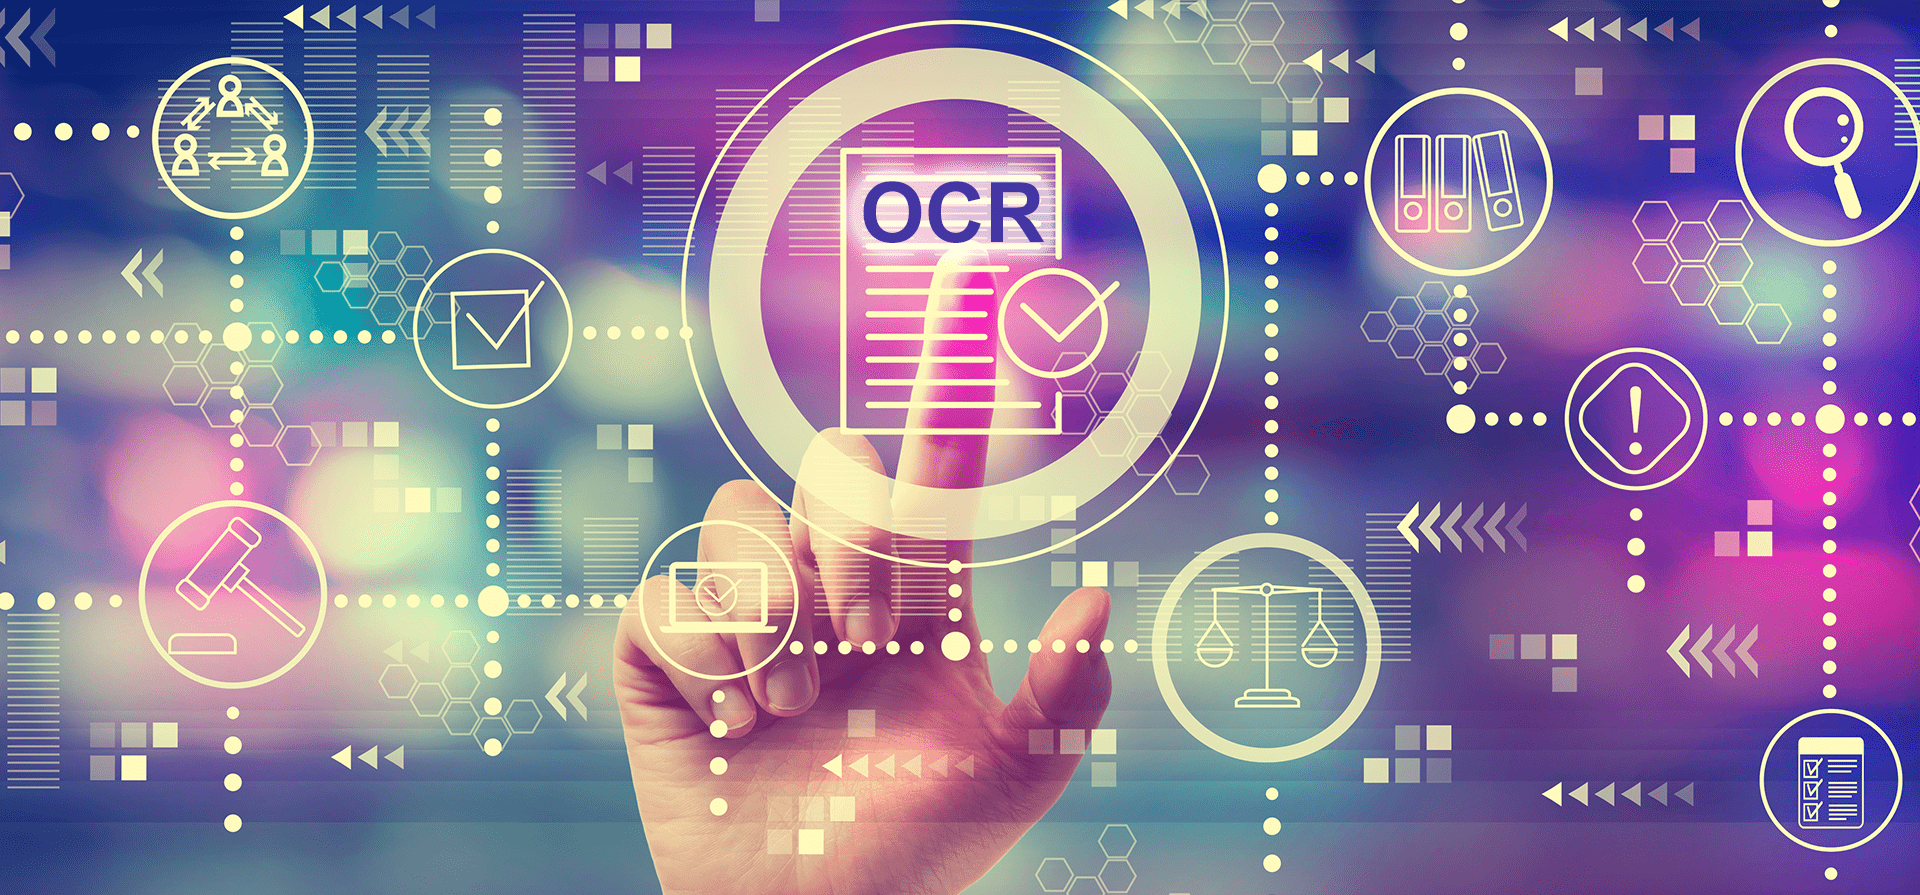 OCR-Technology-An-Old-Tool-is-New-Again